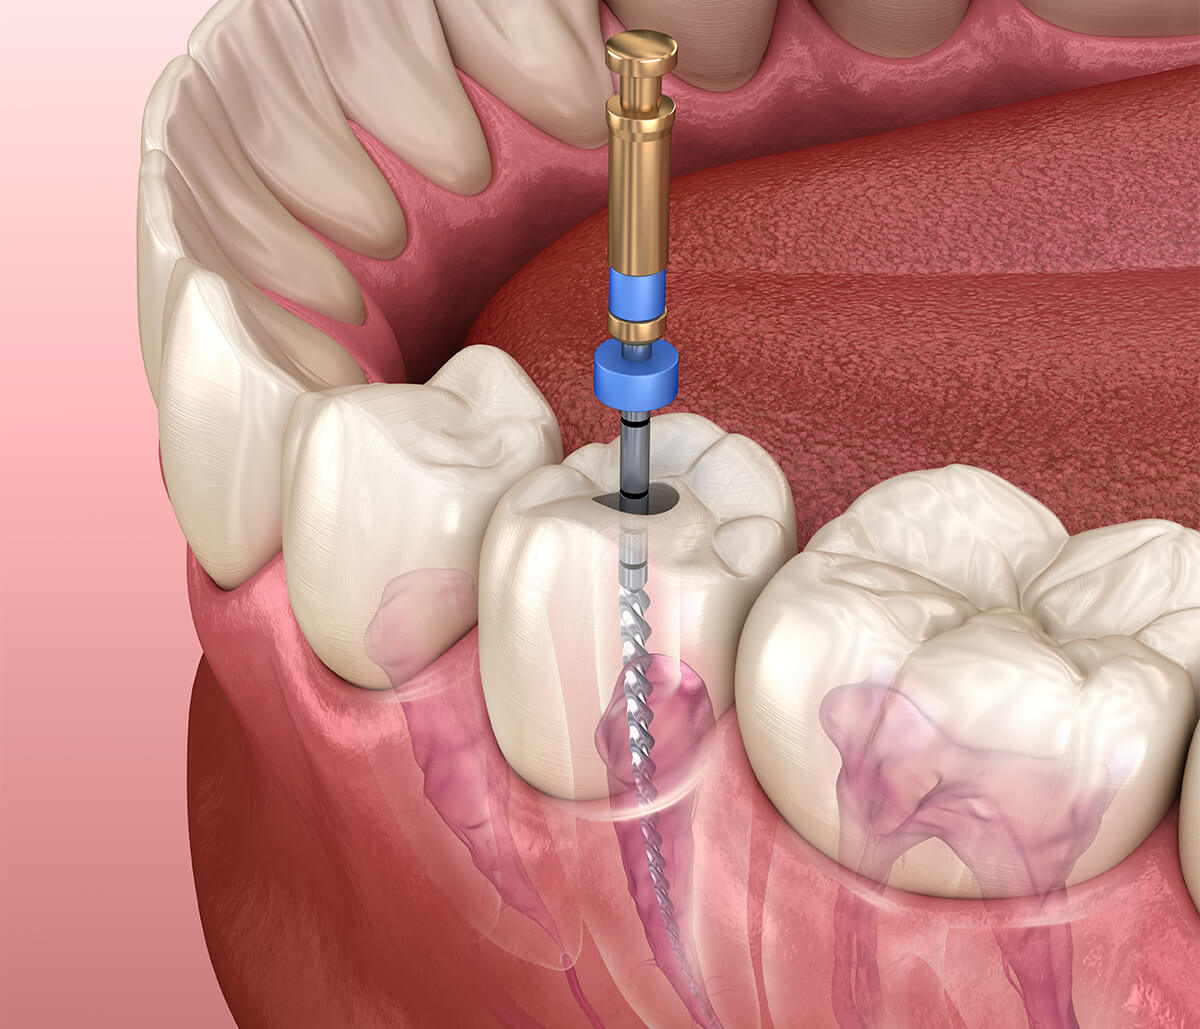 Infected Root Canal Treatment in Houston TX Area